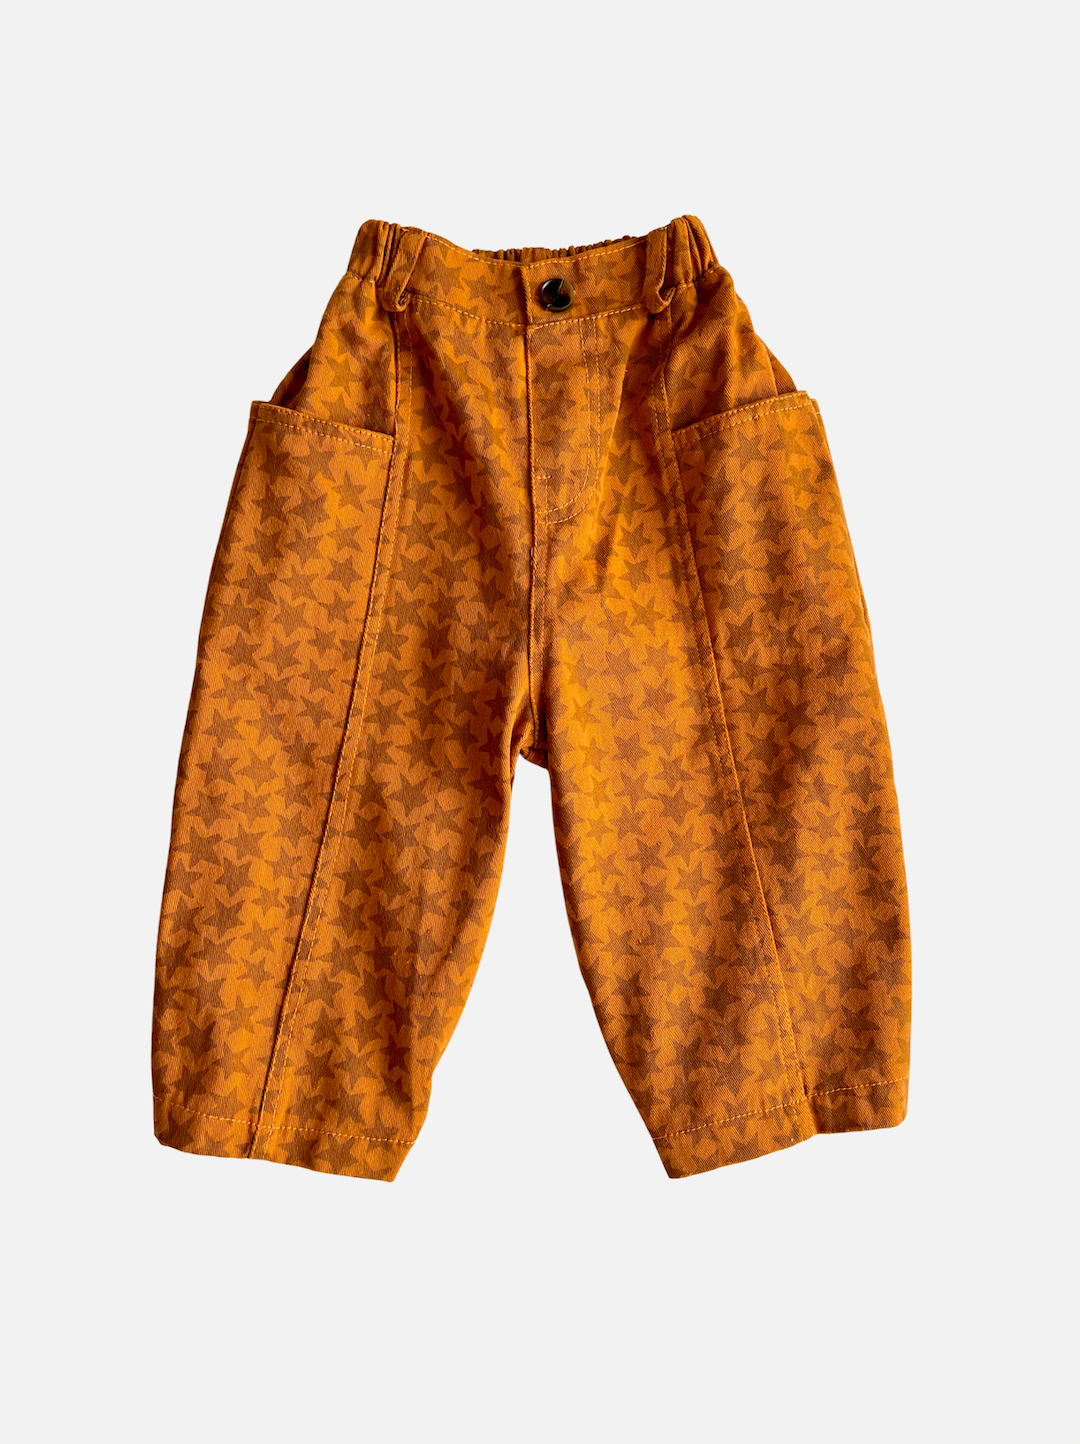 Rust | A pair of kids' pants in orange with a pattern of rust stars, with two long side pockets